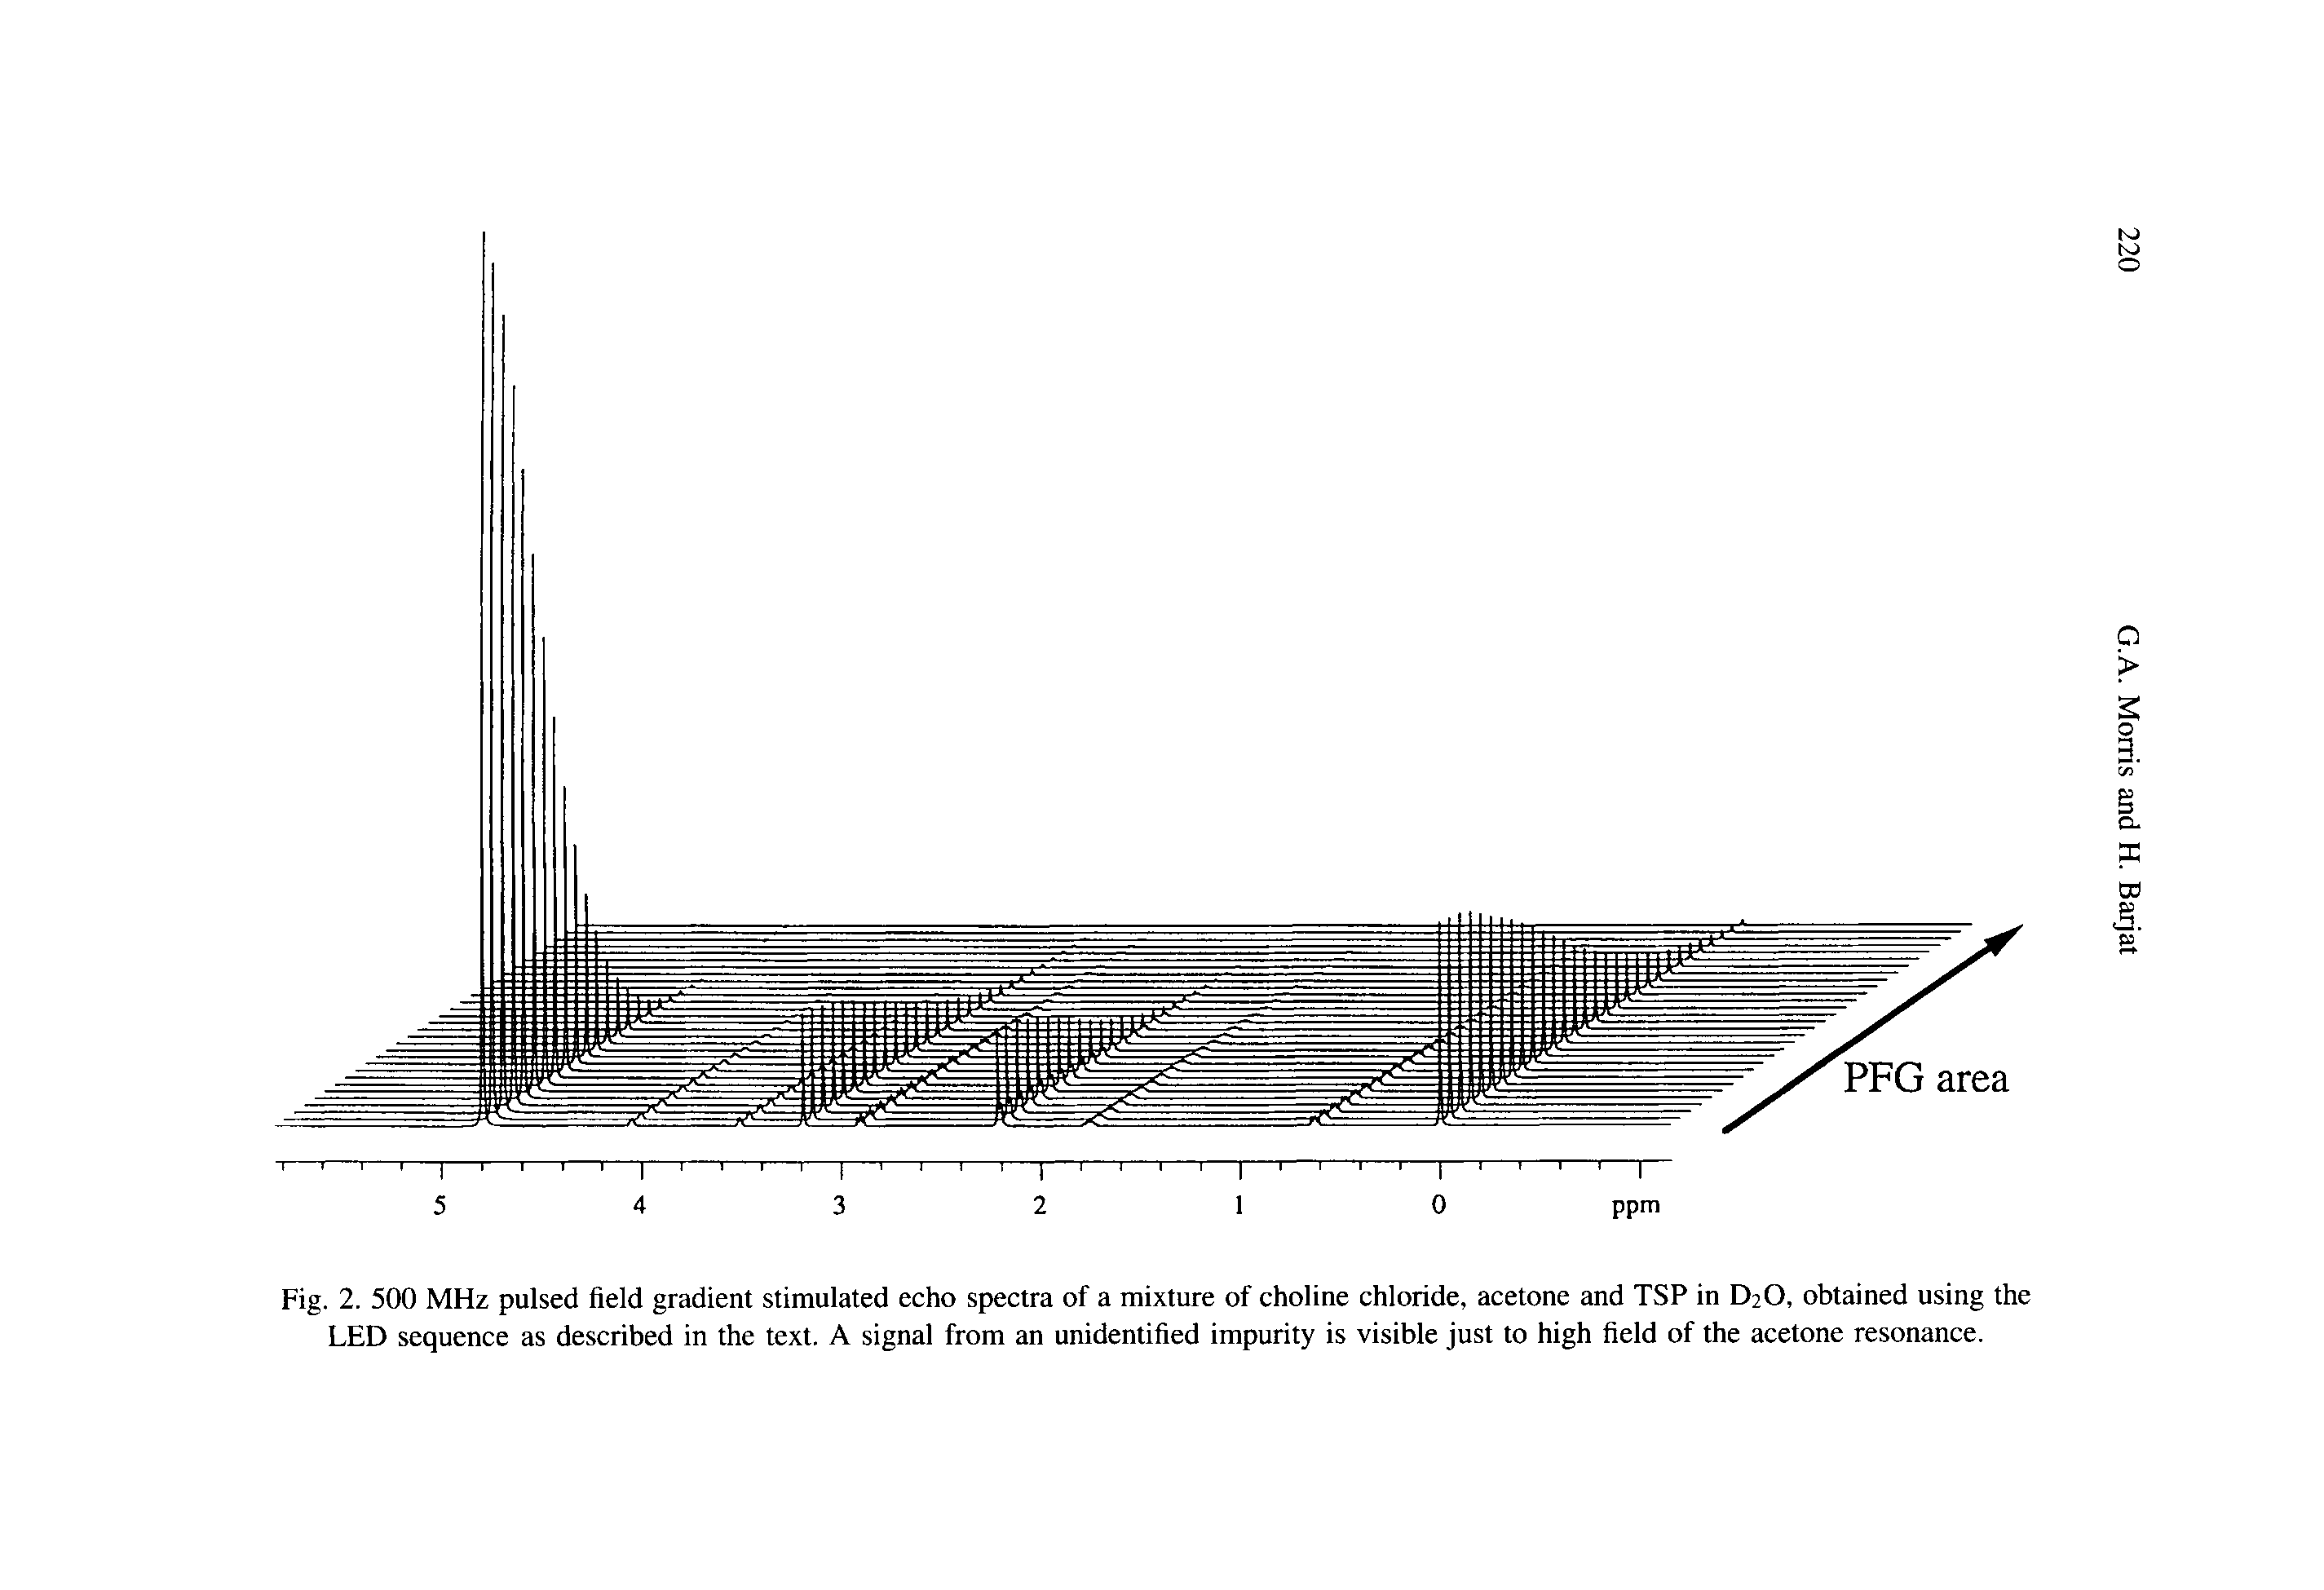 Fig. 2. 500 MHz pulsed field gradient stimulated echo spectra of a mixture of choline chloride, acetone and TSP in D2O, obtained using the LED sequence as described in the text. A signal from an unidentified impurity is visible just to high field of the acetone resonance.